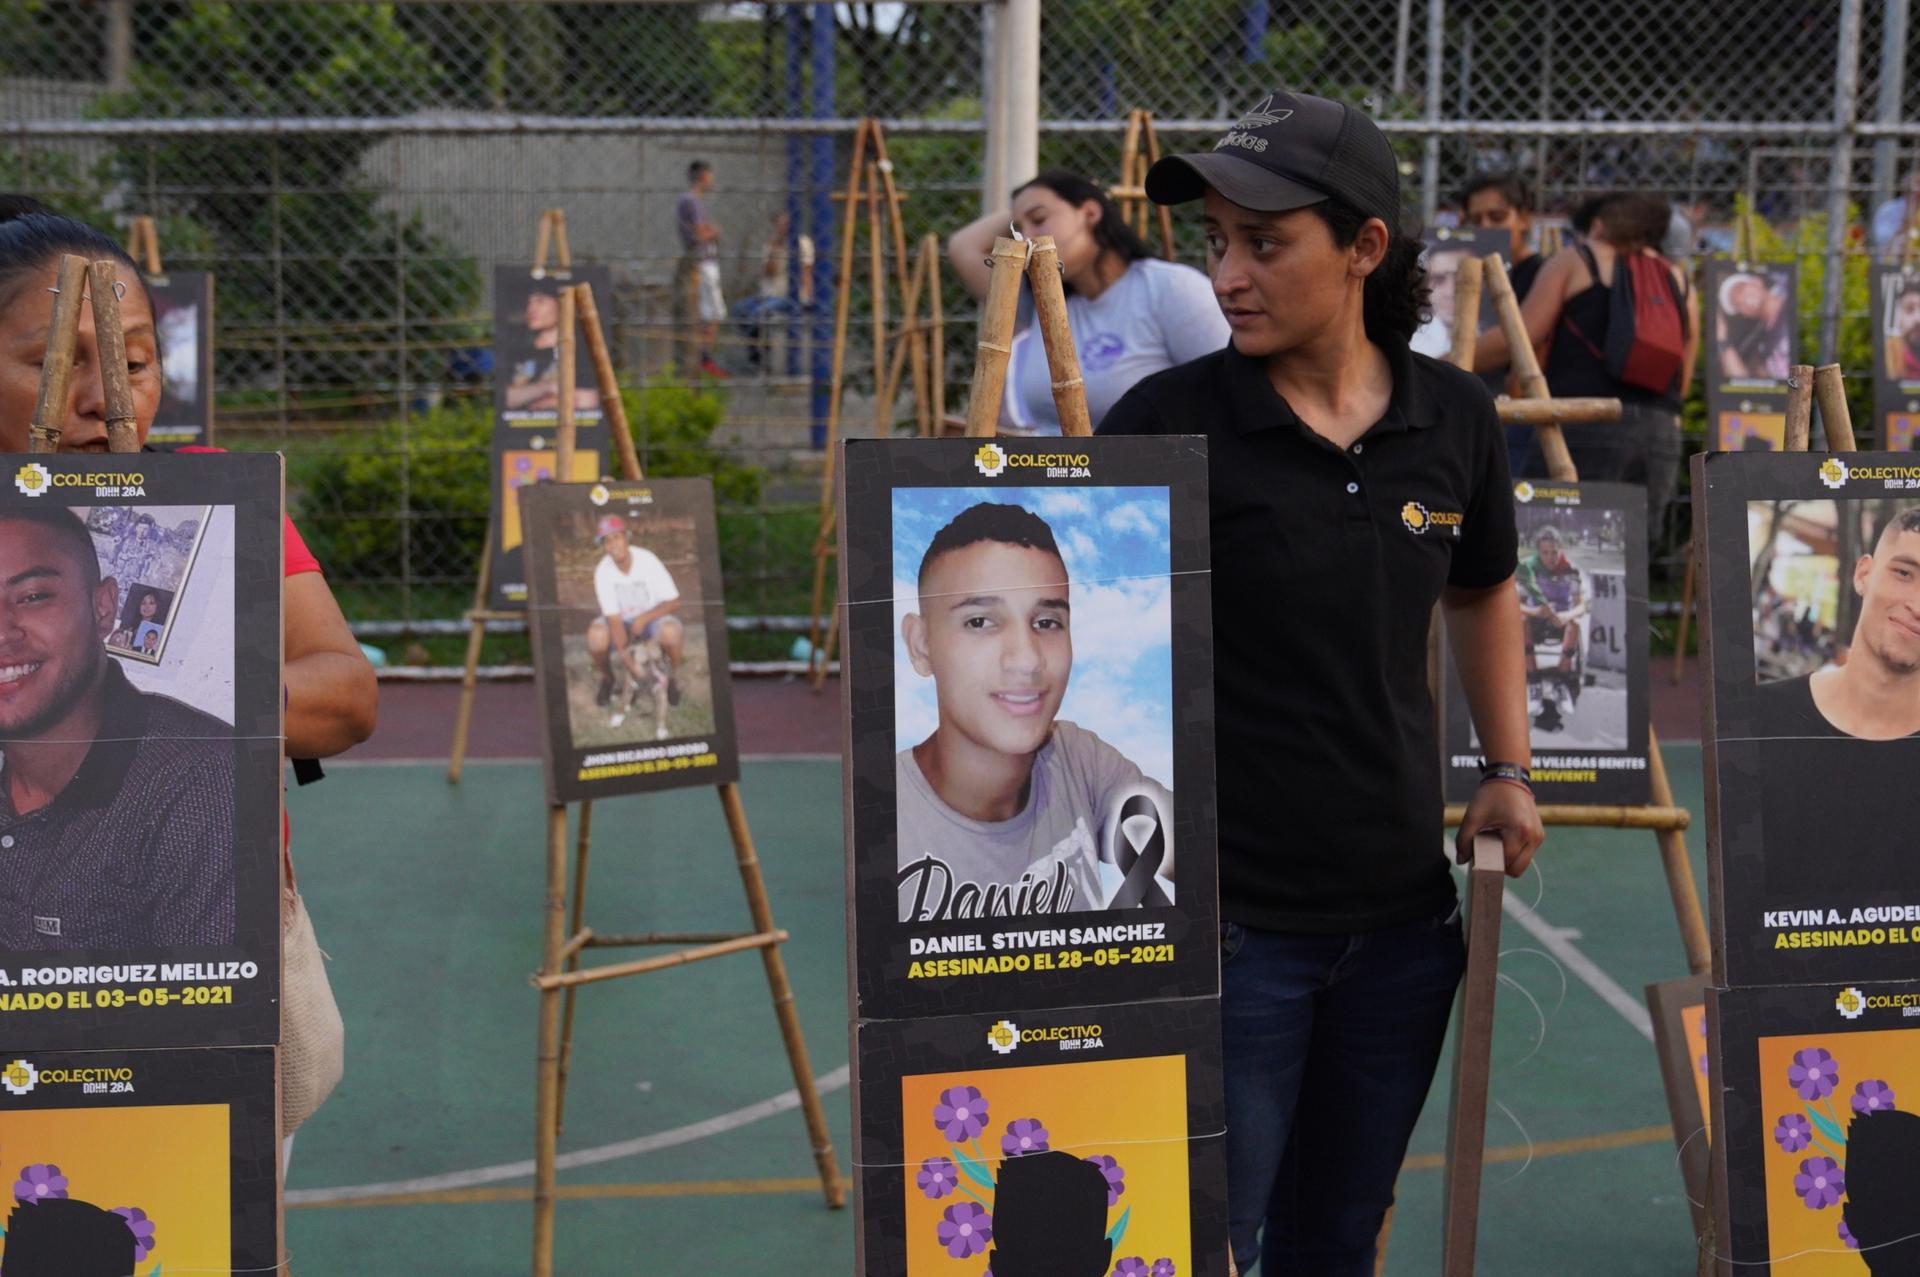 Families of youth killed while protesting in Colombia last year